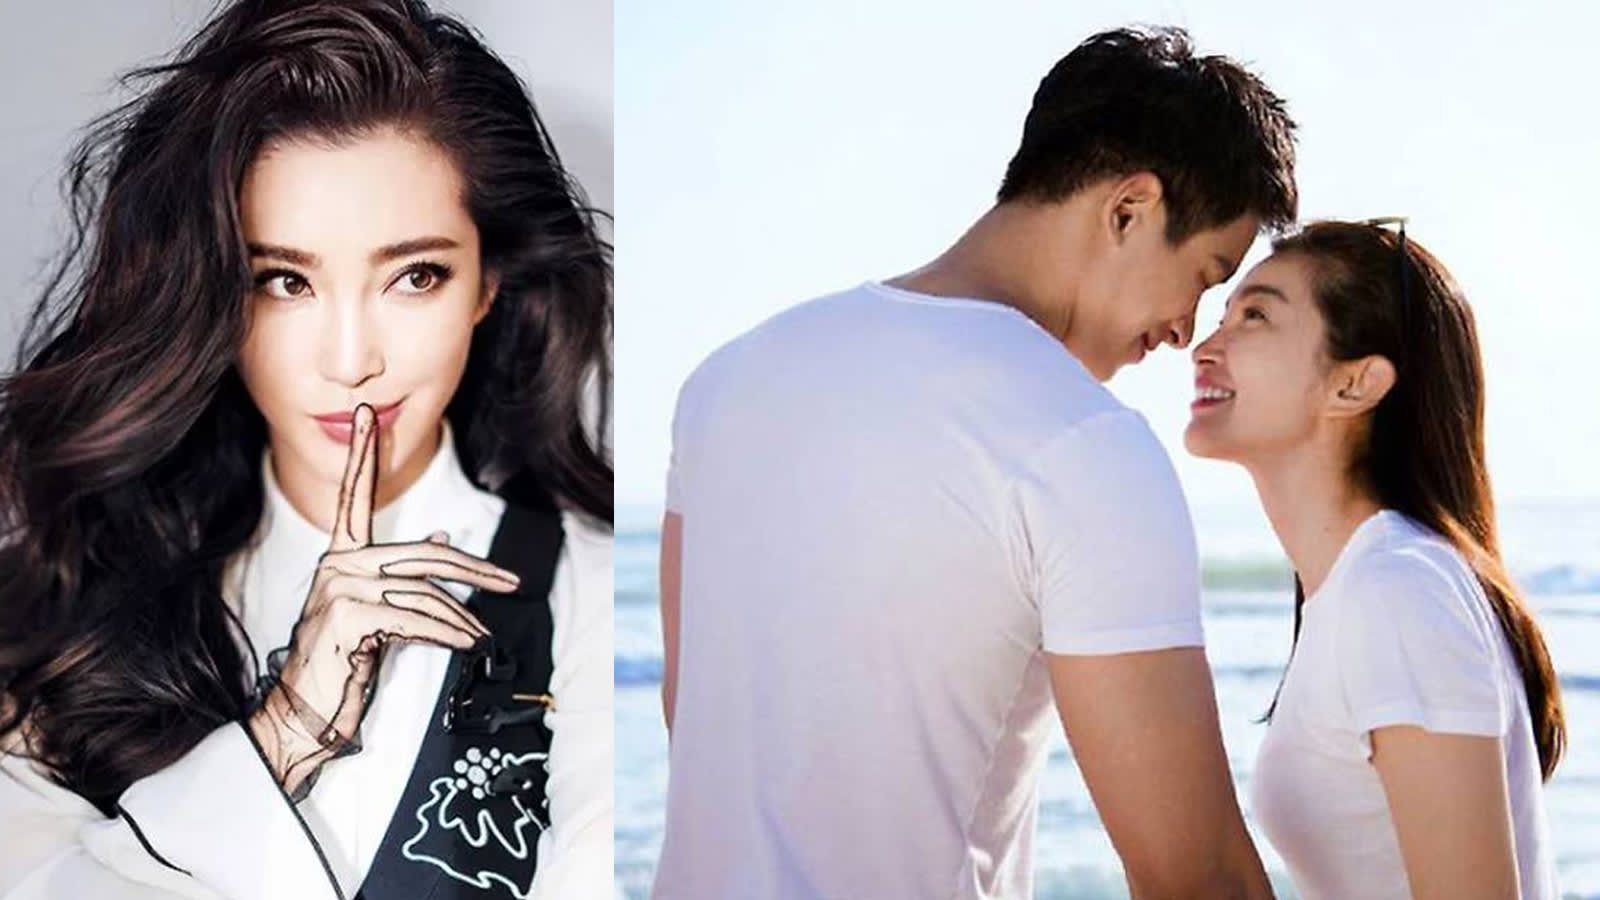 Netizen Says Sorry For Making Up Rumour That Li Bingbing's Boyfriend Was  Blackmailing The Actress With Intimate Photos - 8days